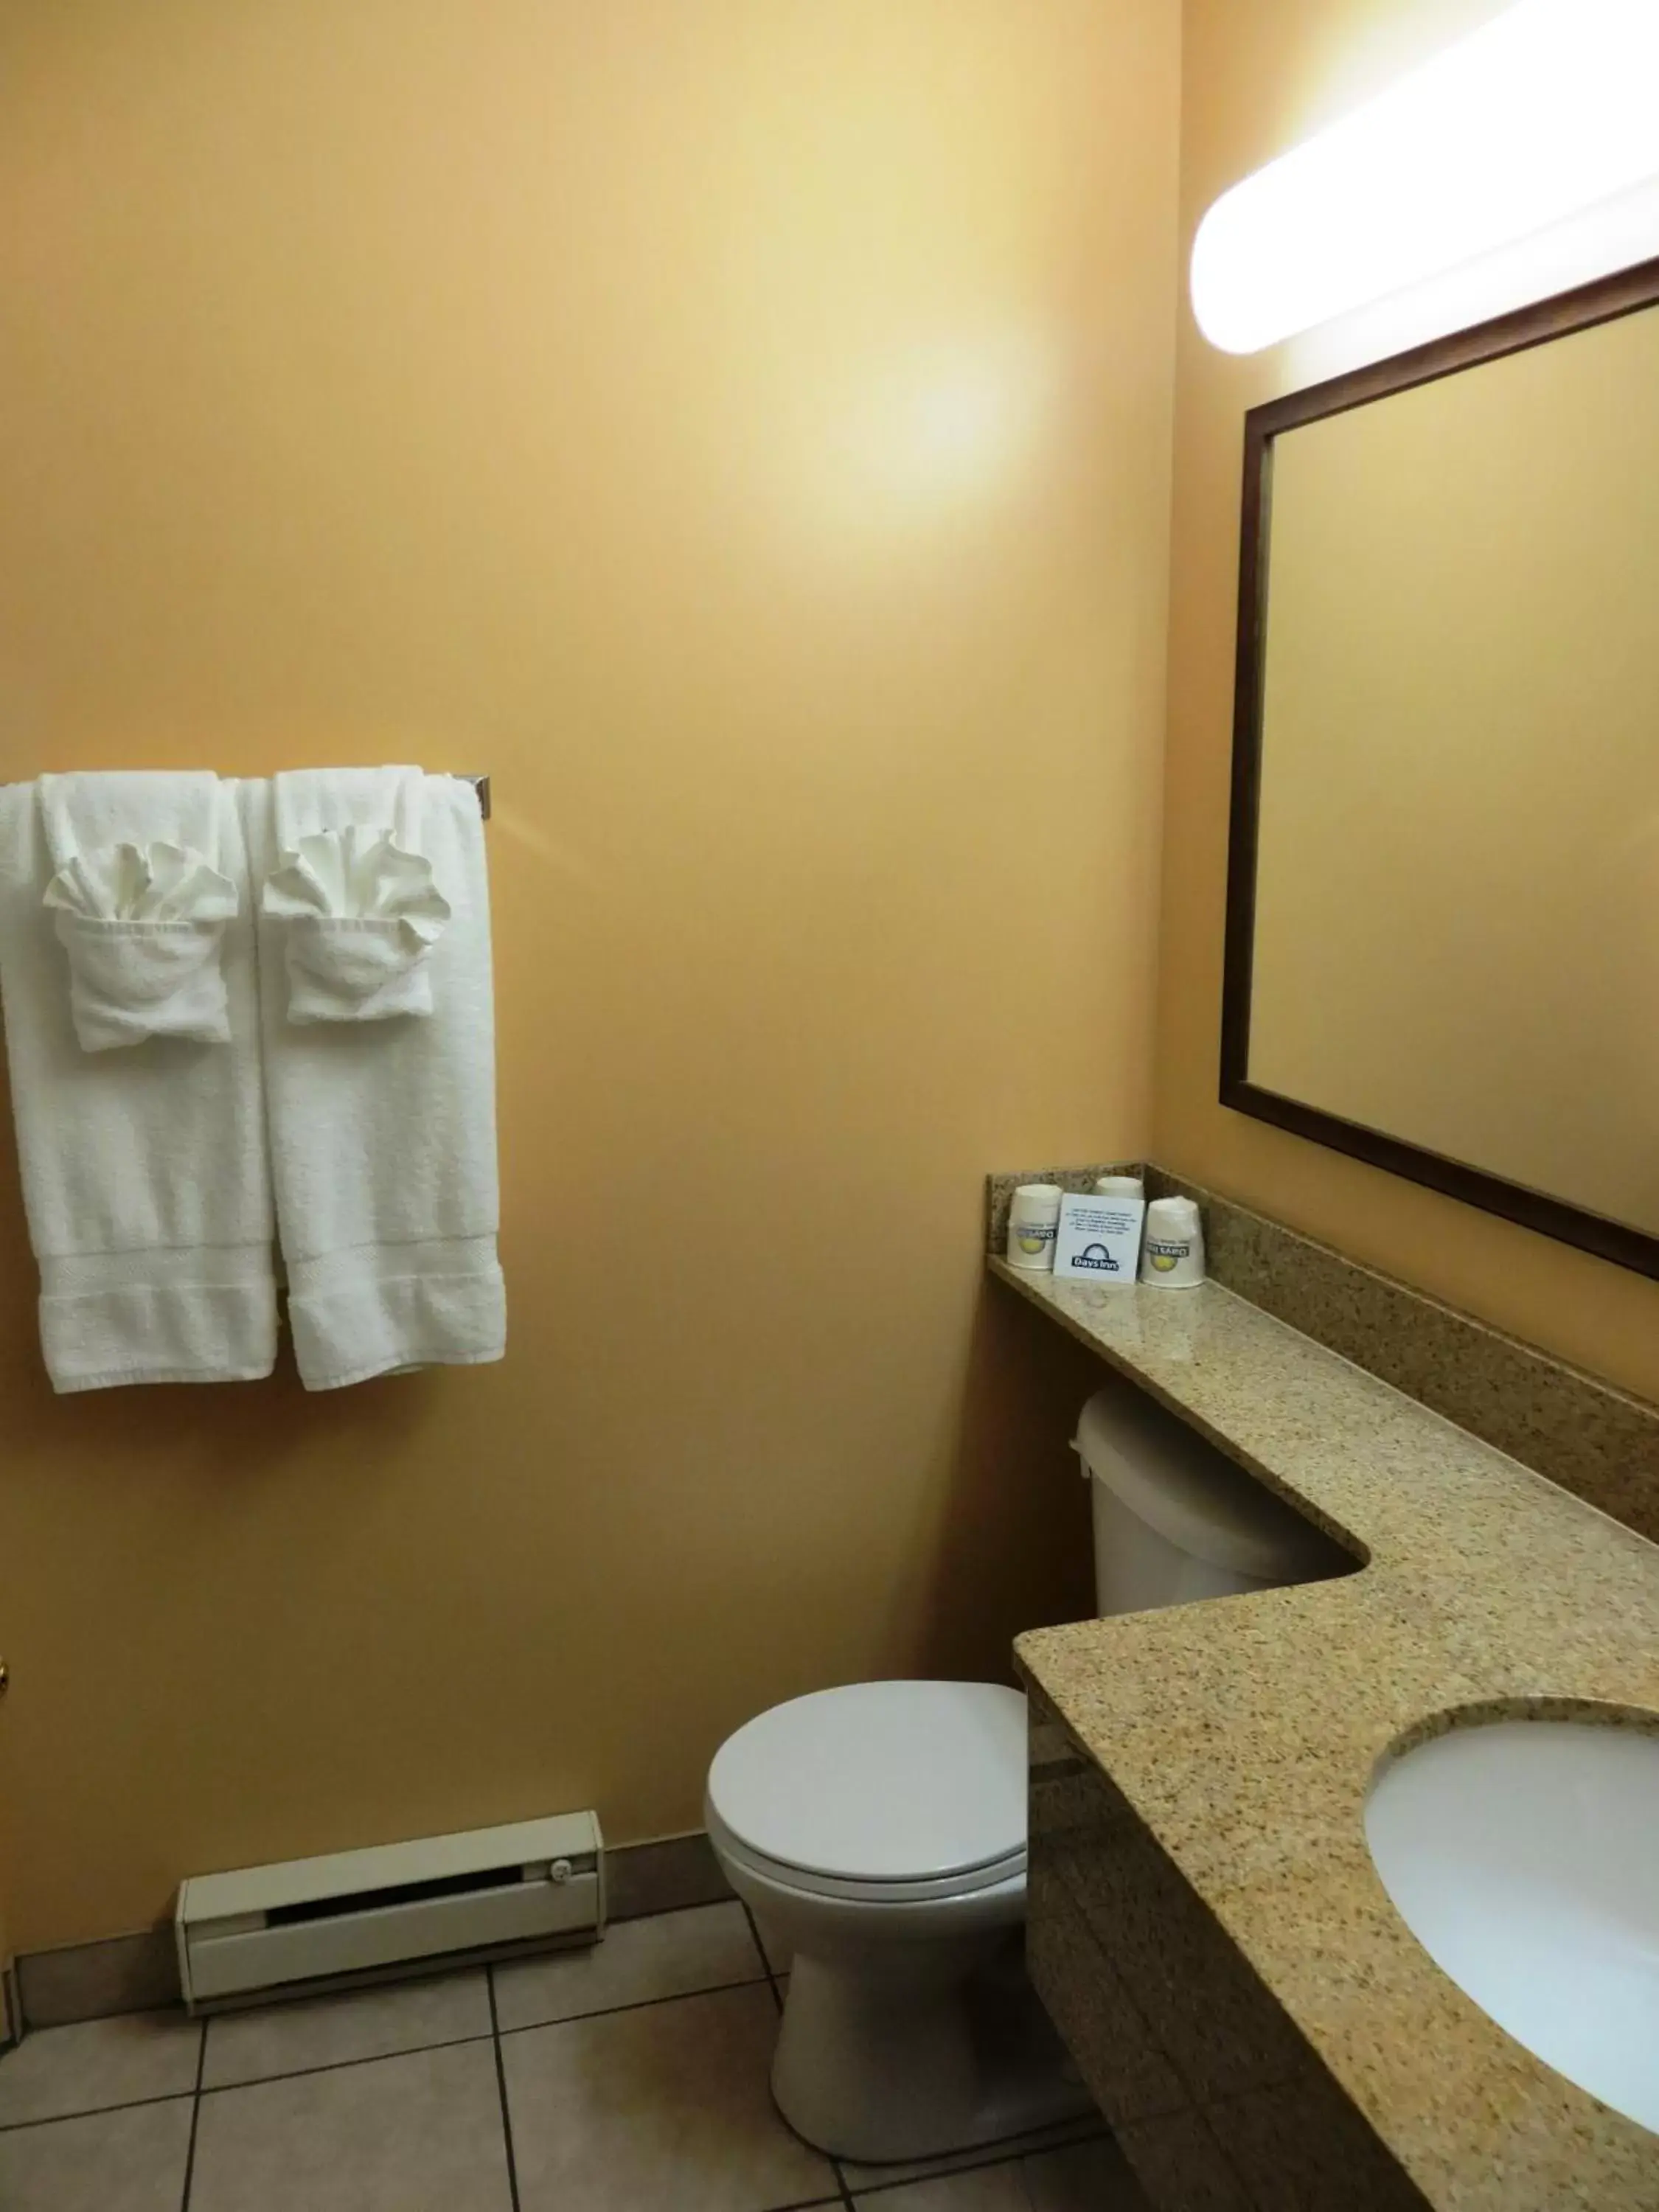 Bathroom in Days Inn by Wyndham Oromocto Conference Centre